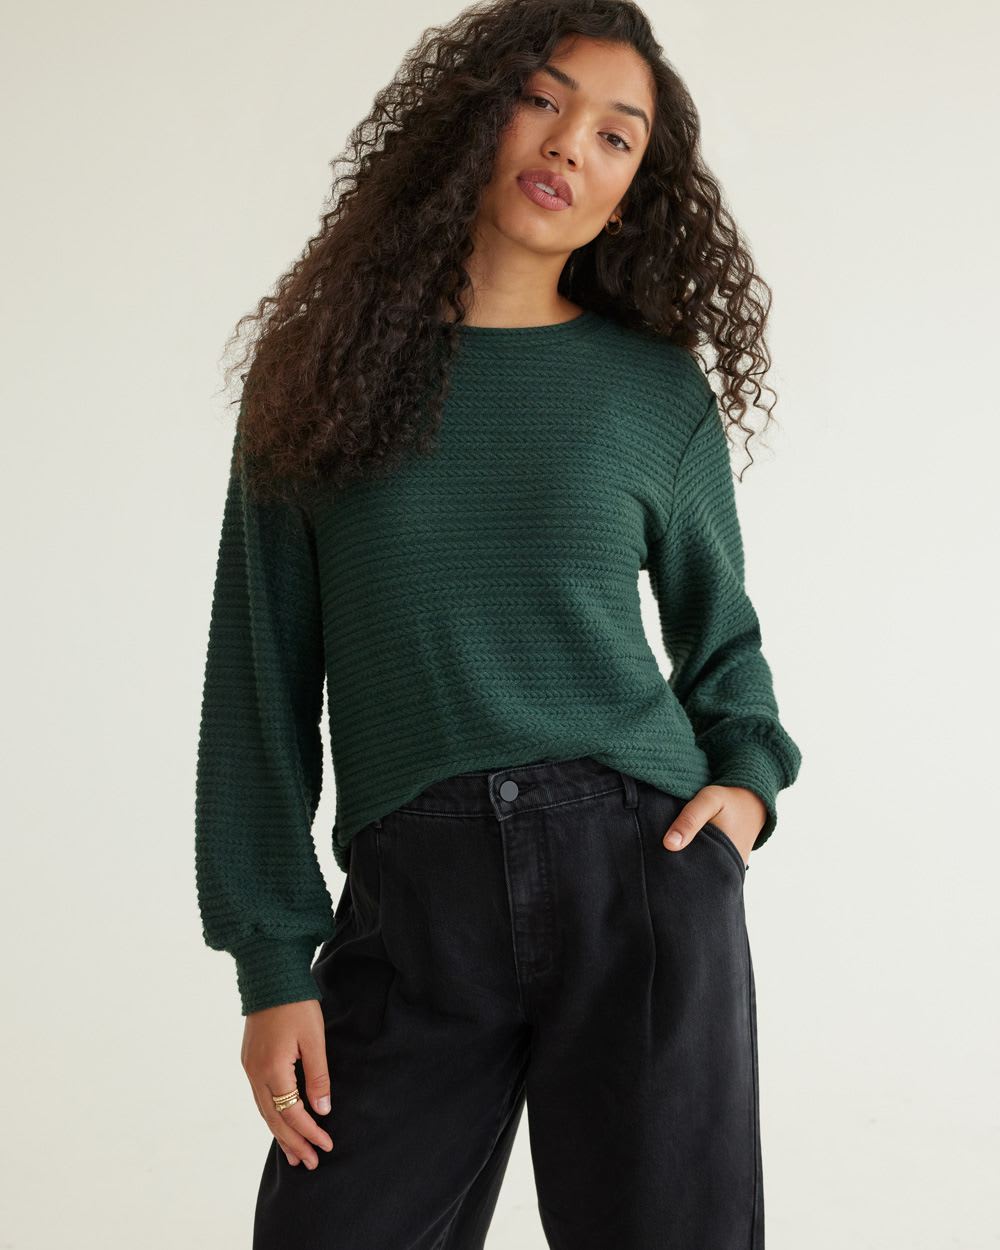 Long-Sleeve Crew-Neck Tee with Cable Stitches